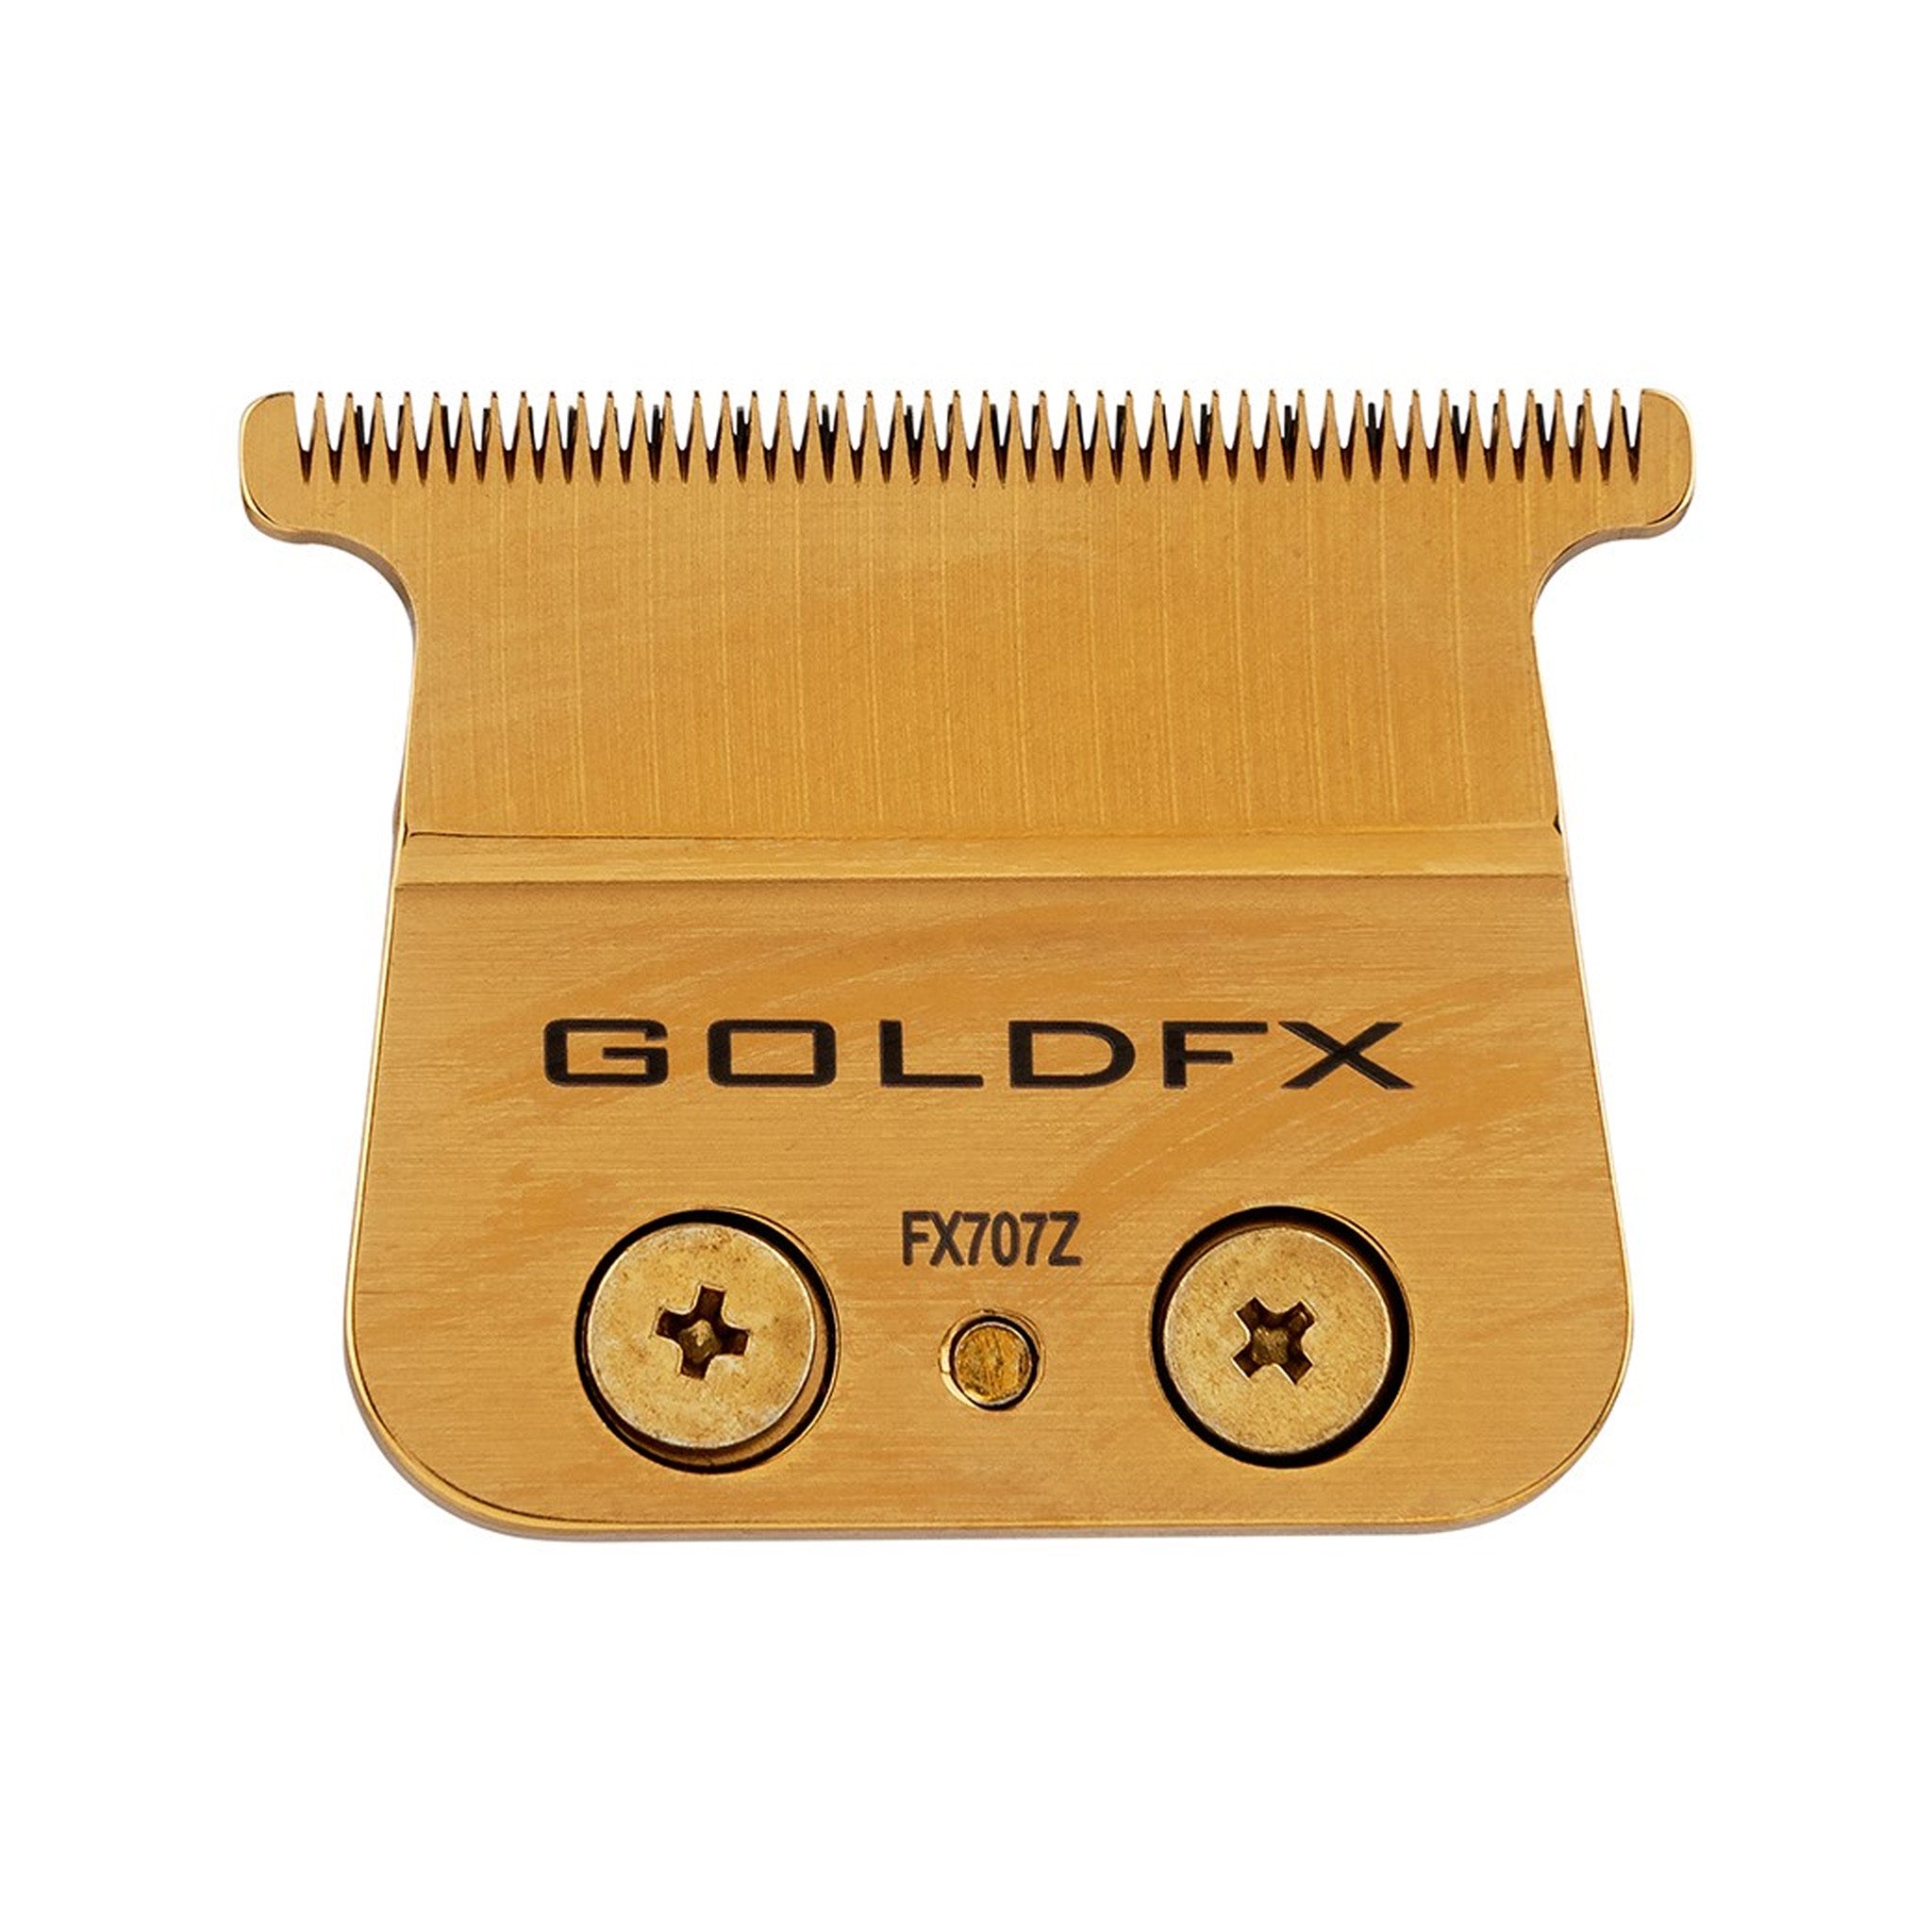 BabylissPRO Replacement Outliner Hair Trimmer Blade Gold FX707Z